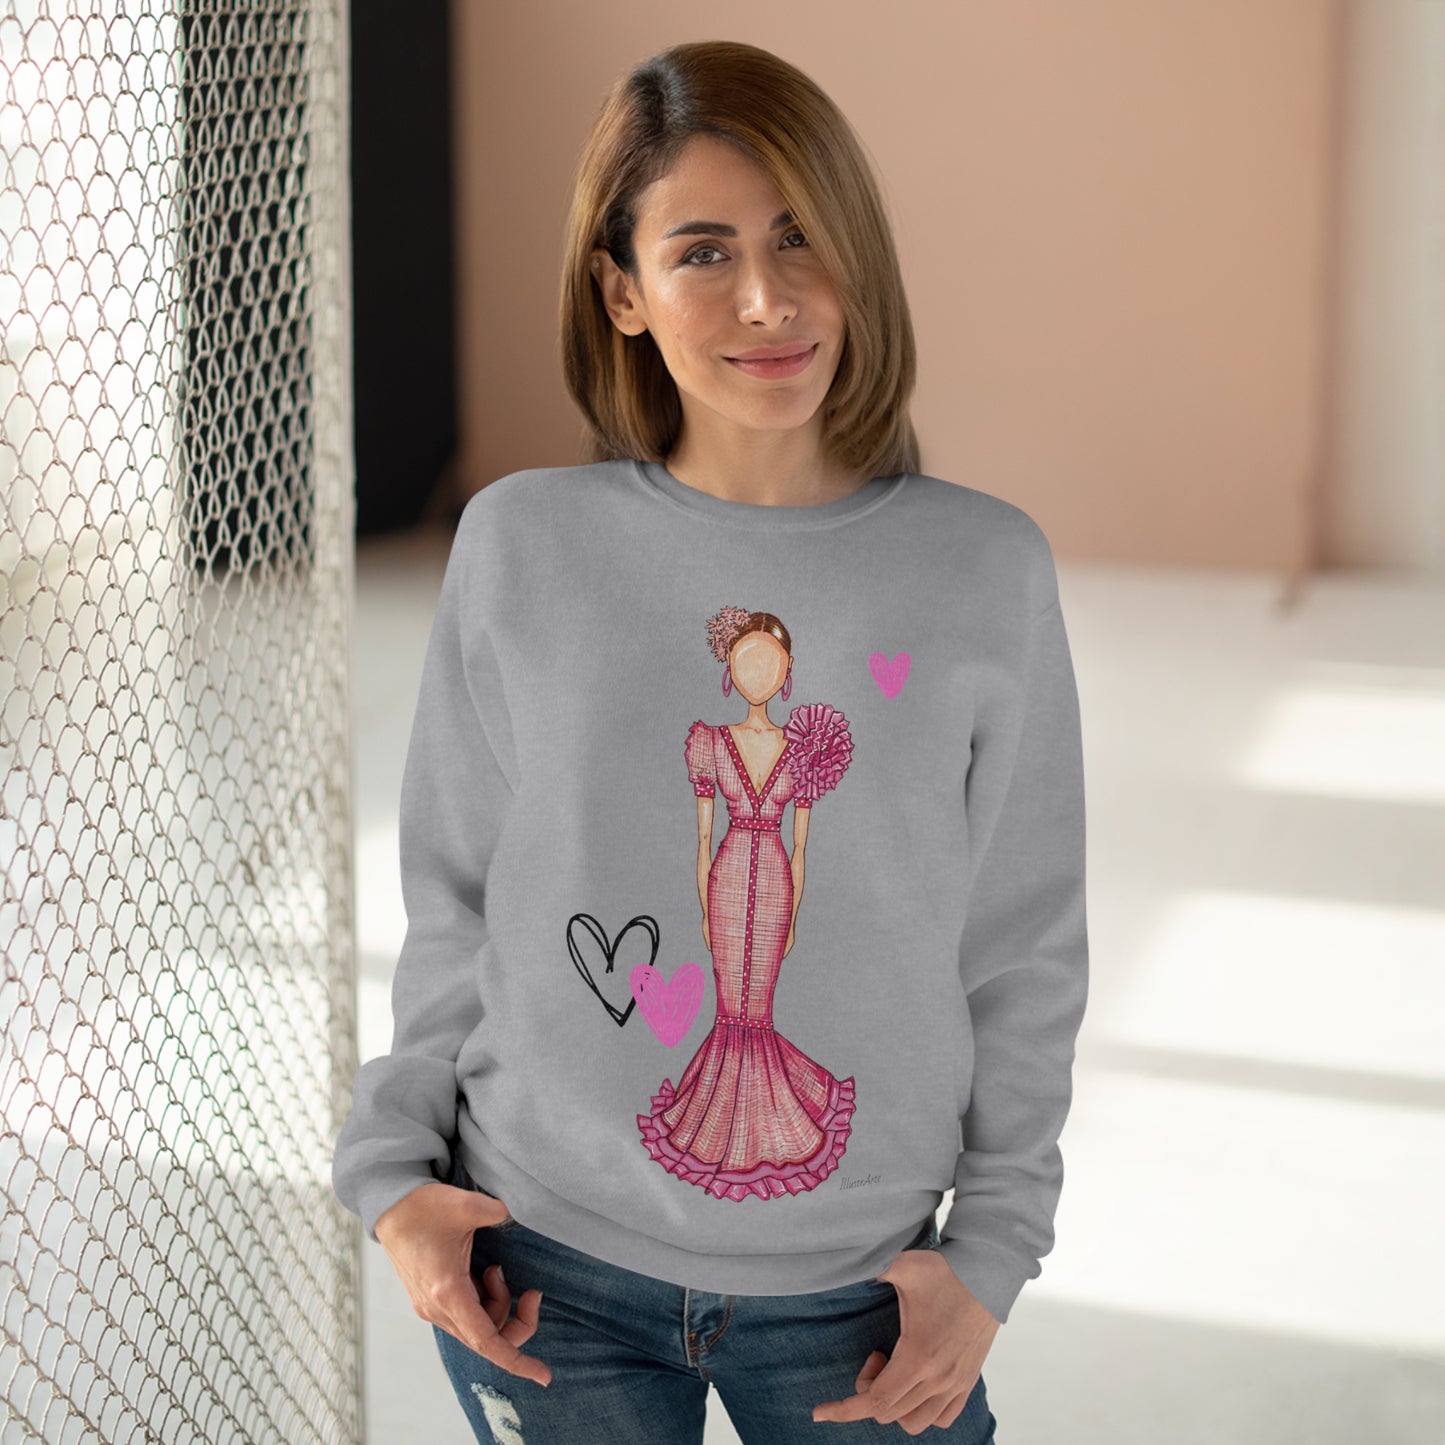 a woman wearing a sweater with a drawing of a woman in a dress